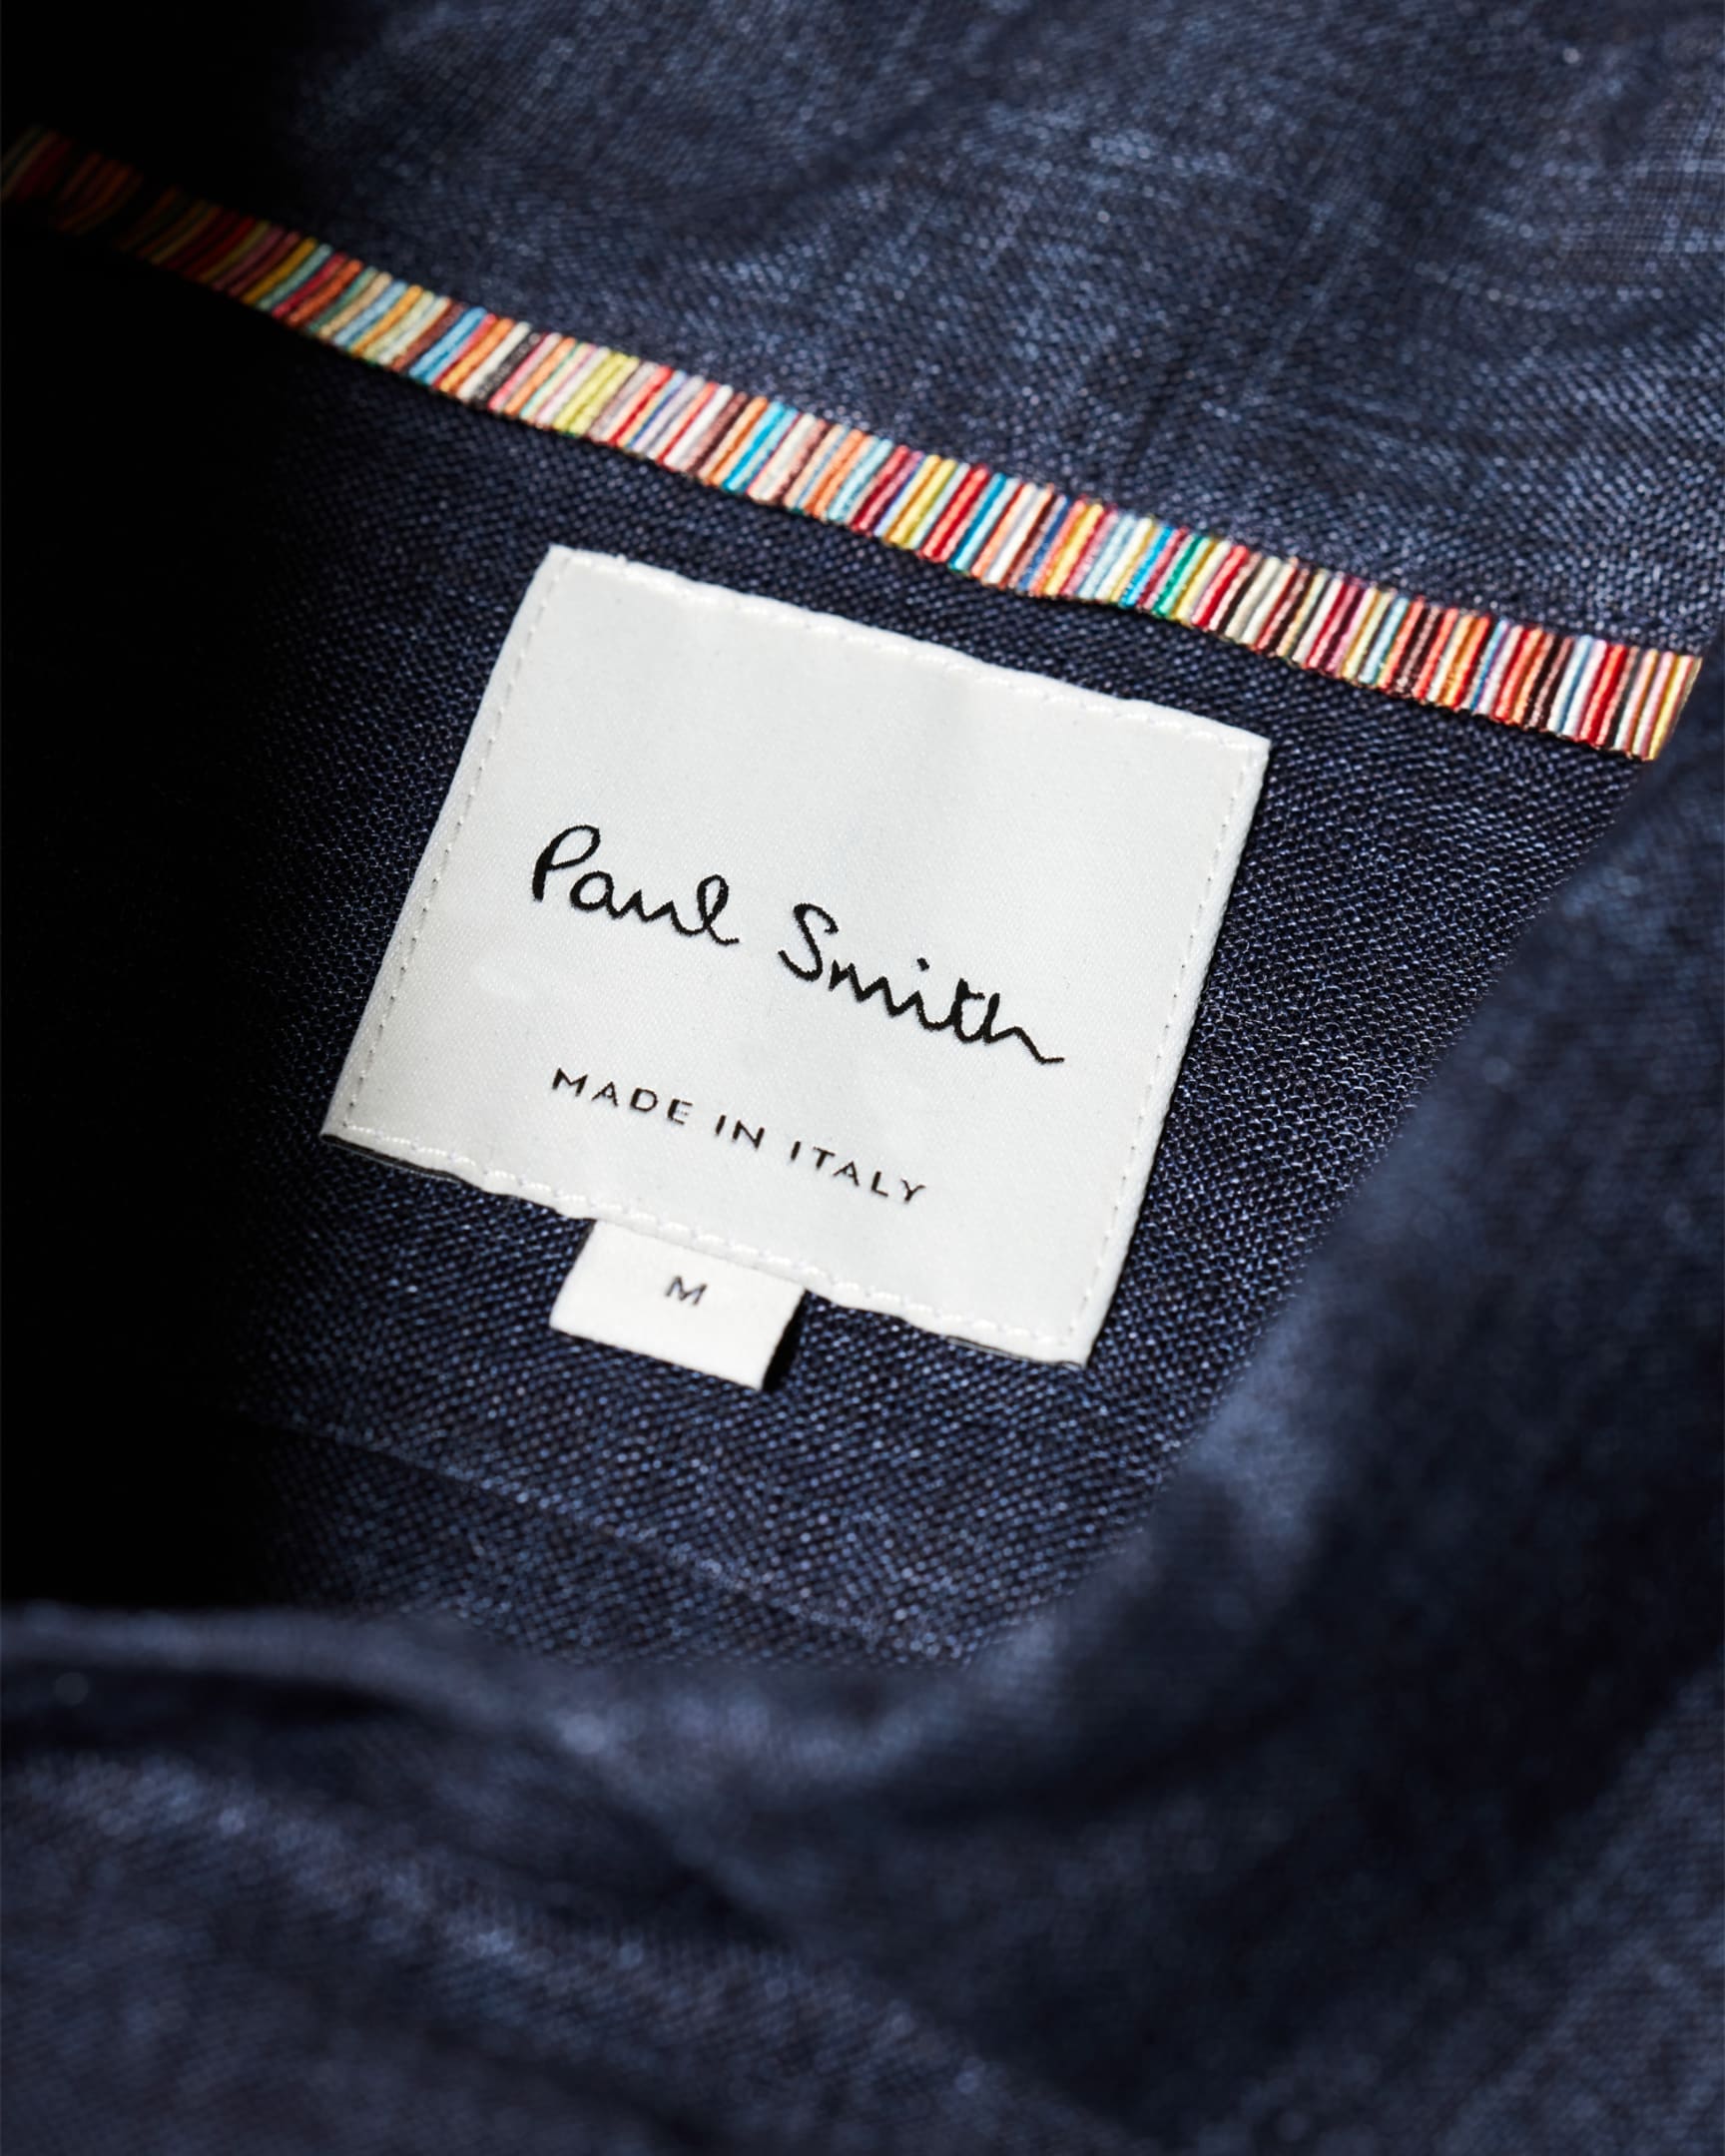 Detail View - Slim-Fit Navy Linen Shirt Paul Smith